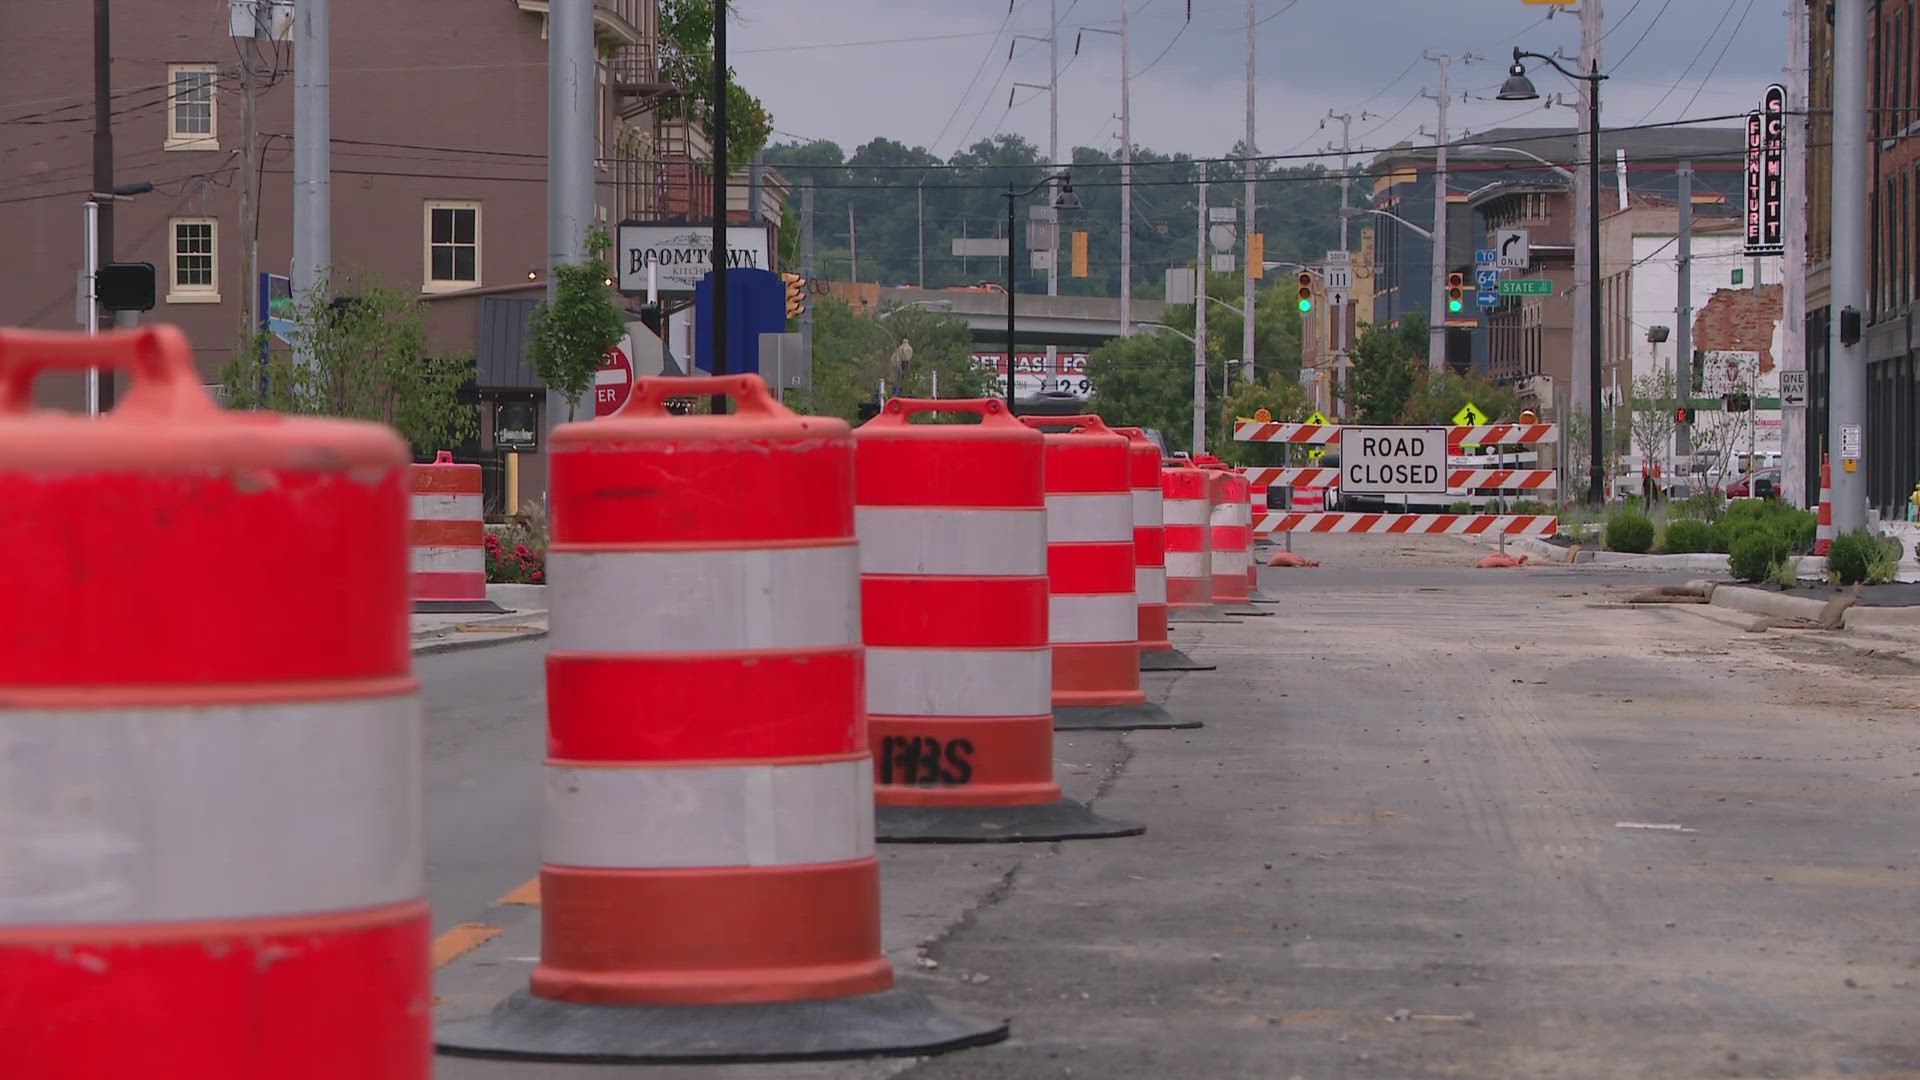 It's a project fit for a city that's ready to get past bridge shutdowns and main street roadblocks.